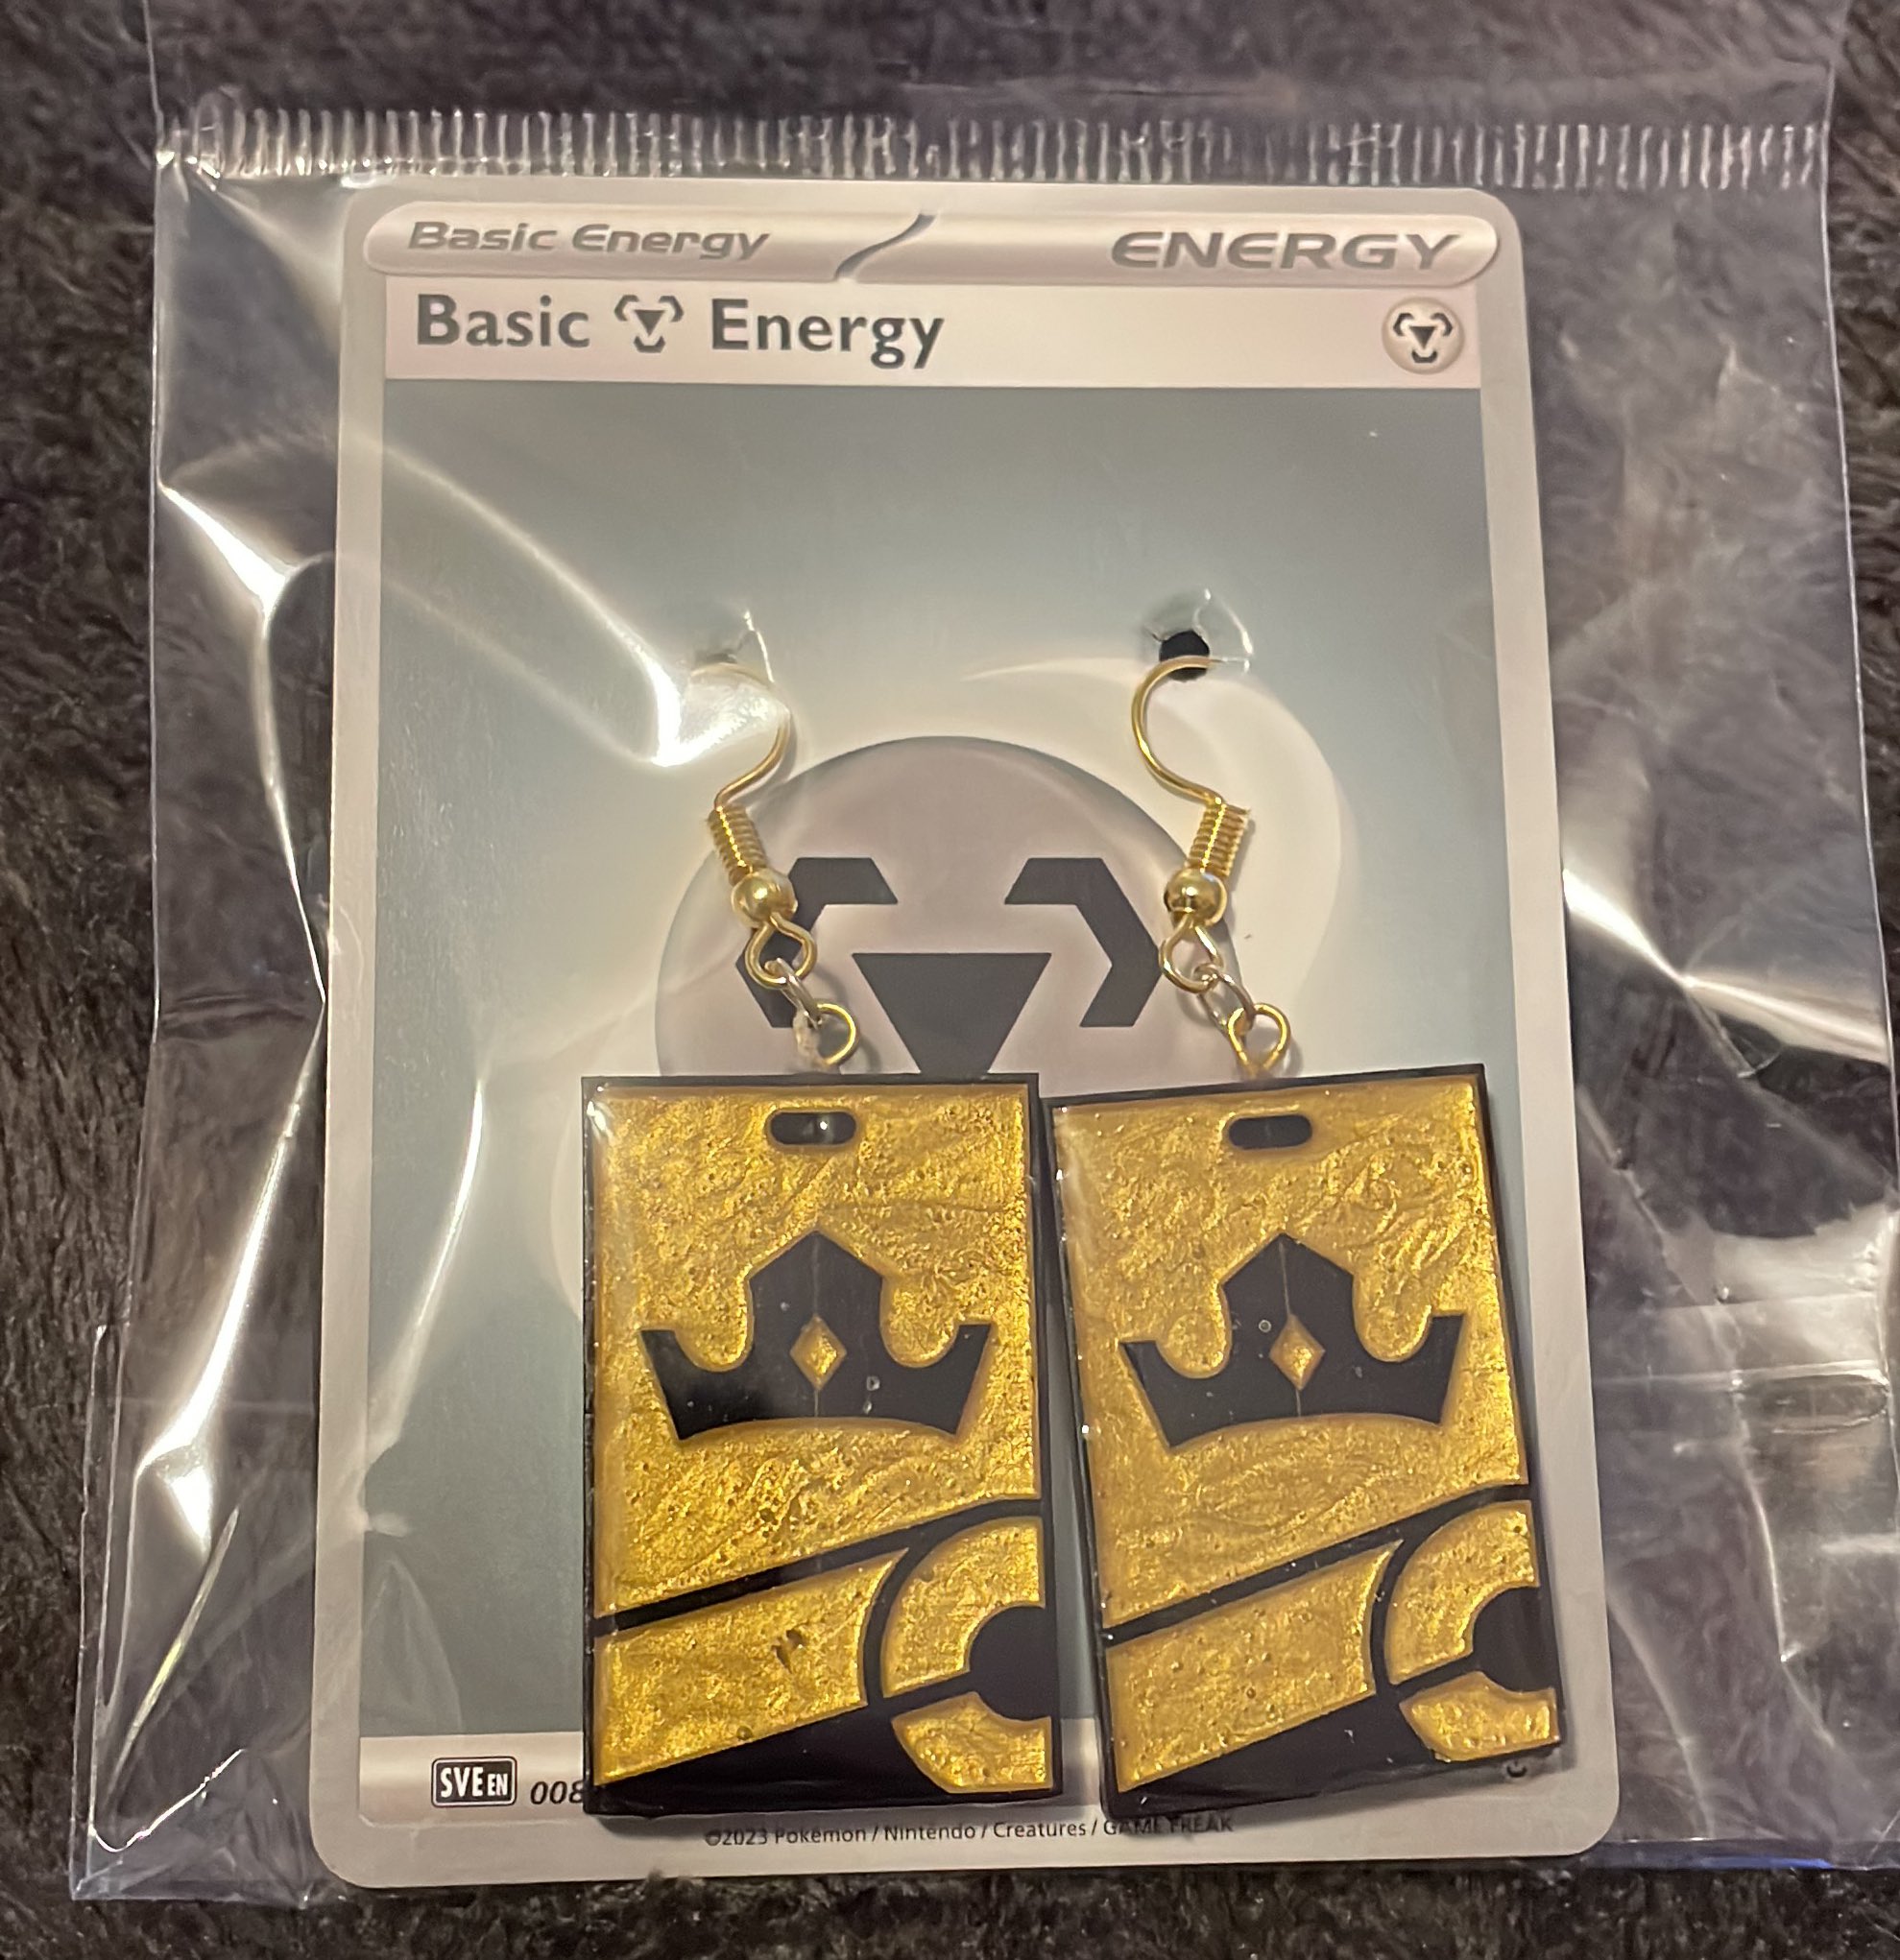 Yarnmon - Hey guys! This is a little unrelated to amigurumi, but I have  added a new type of item to my Etsy store--Recycled Pokemon Card Necklaces!  They'd be a great addition